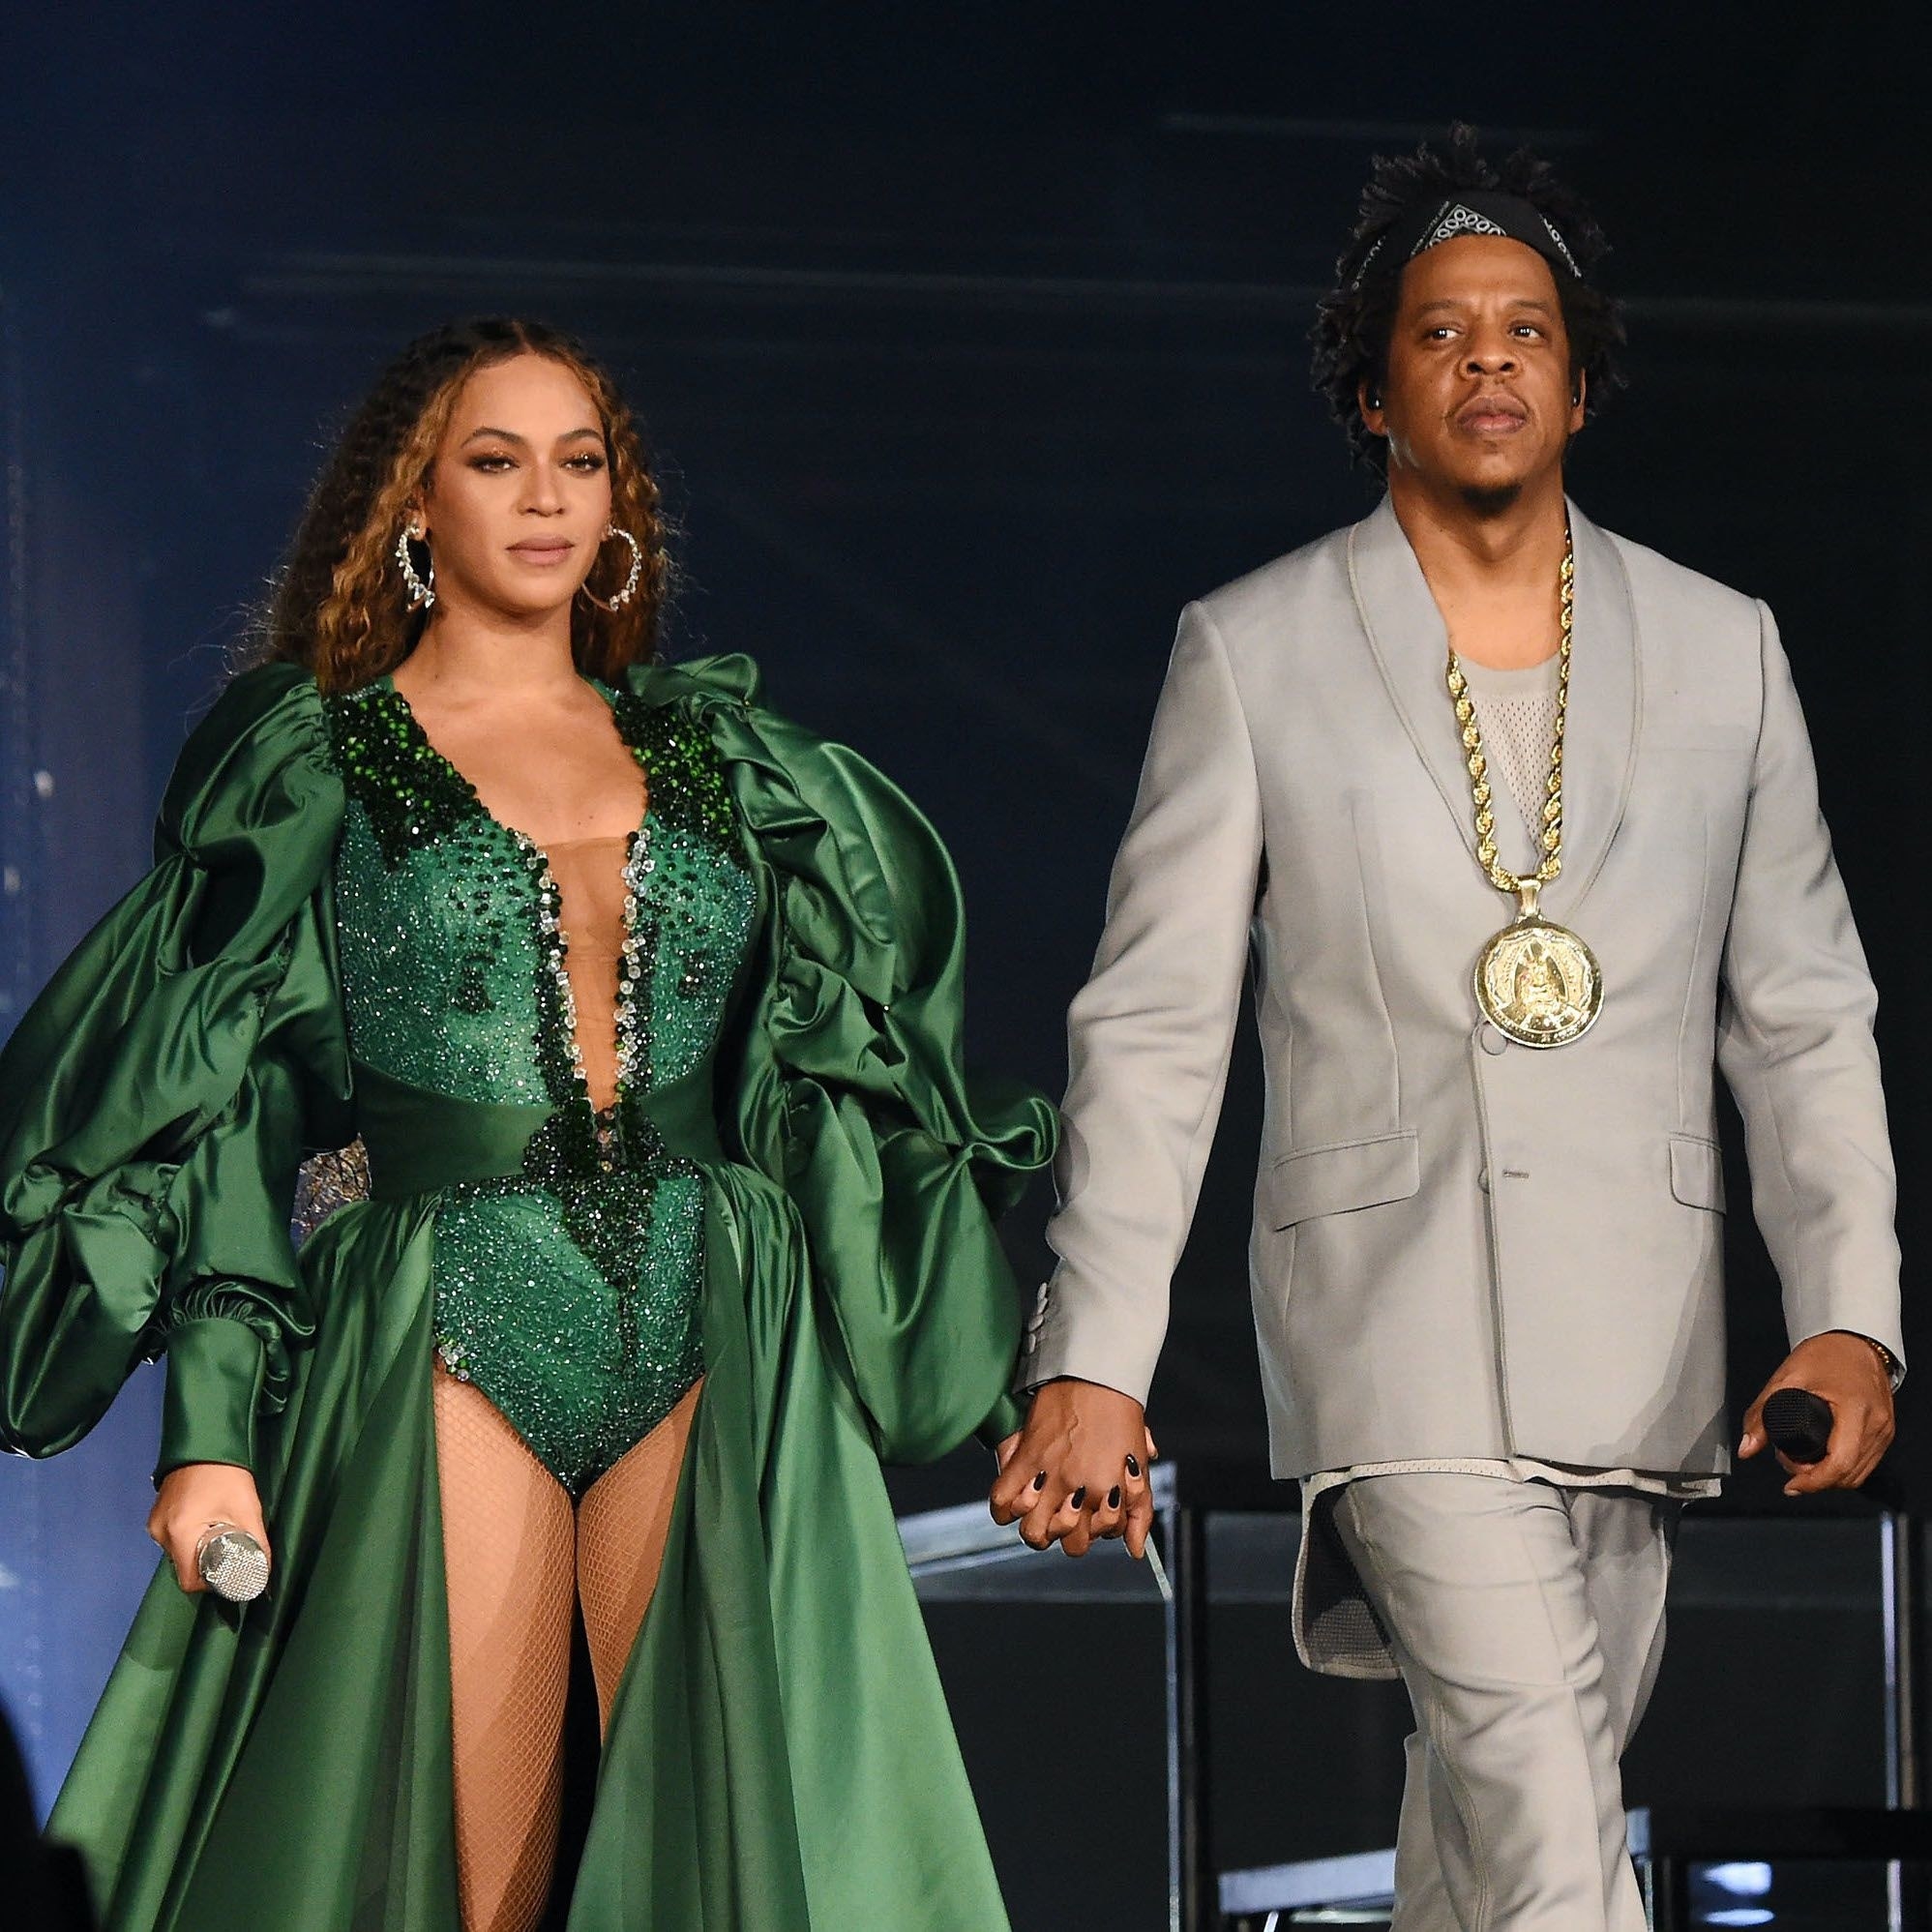 Beyonce holding hands with husband Jay-Z on stage